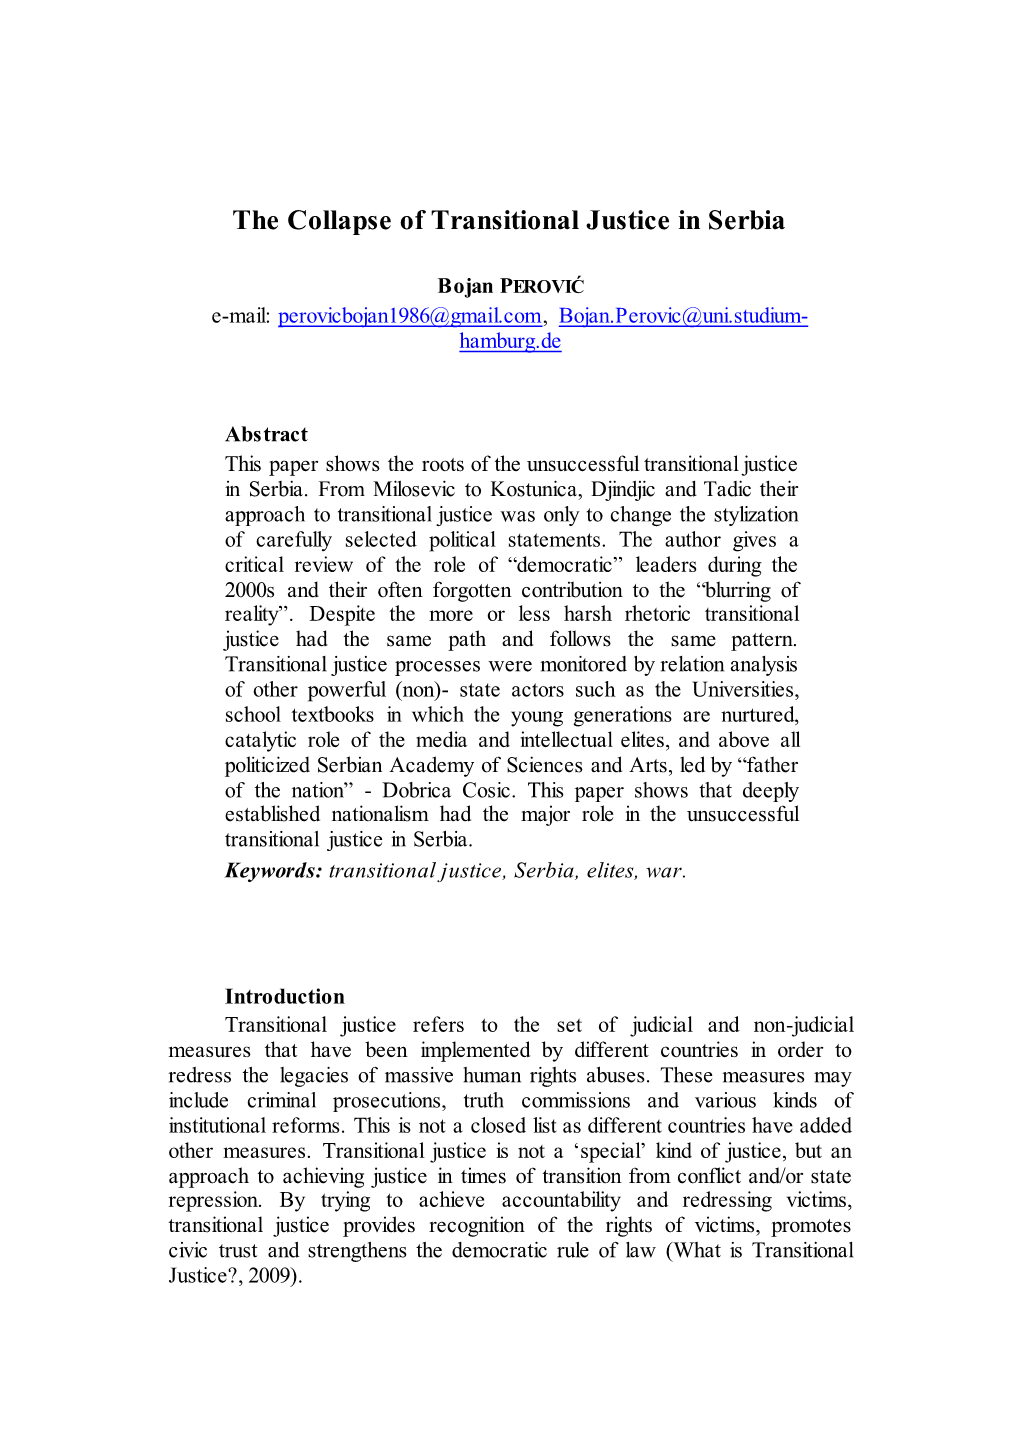 The Collapse of Transitional Justice in Serbia